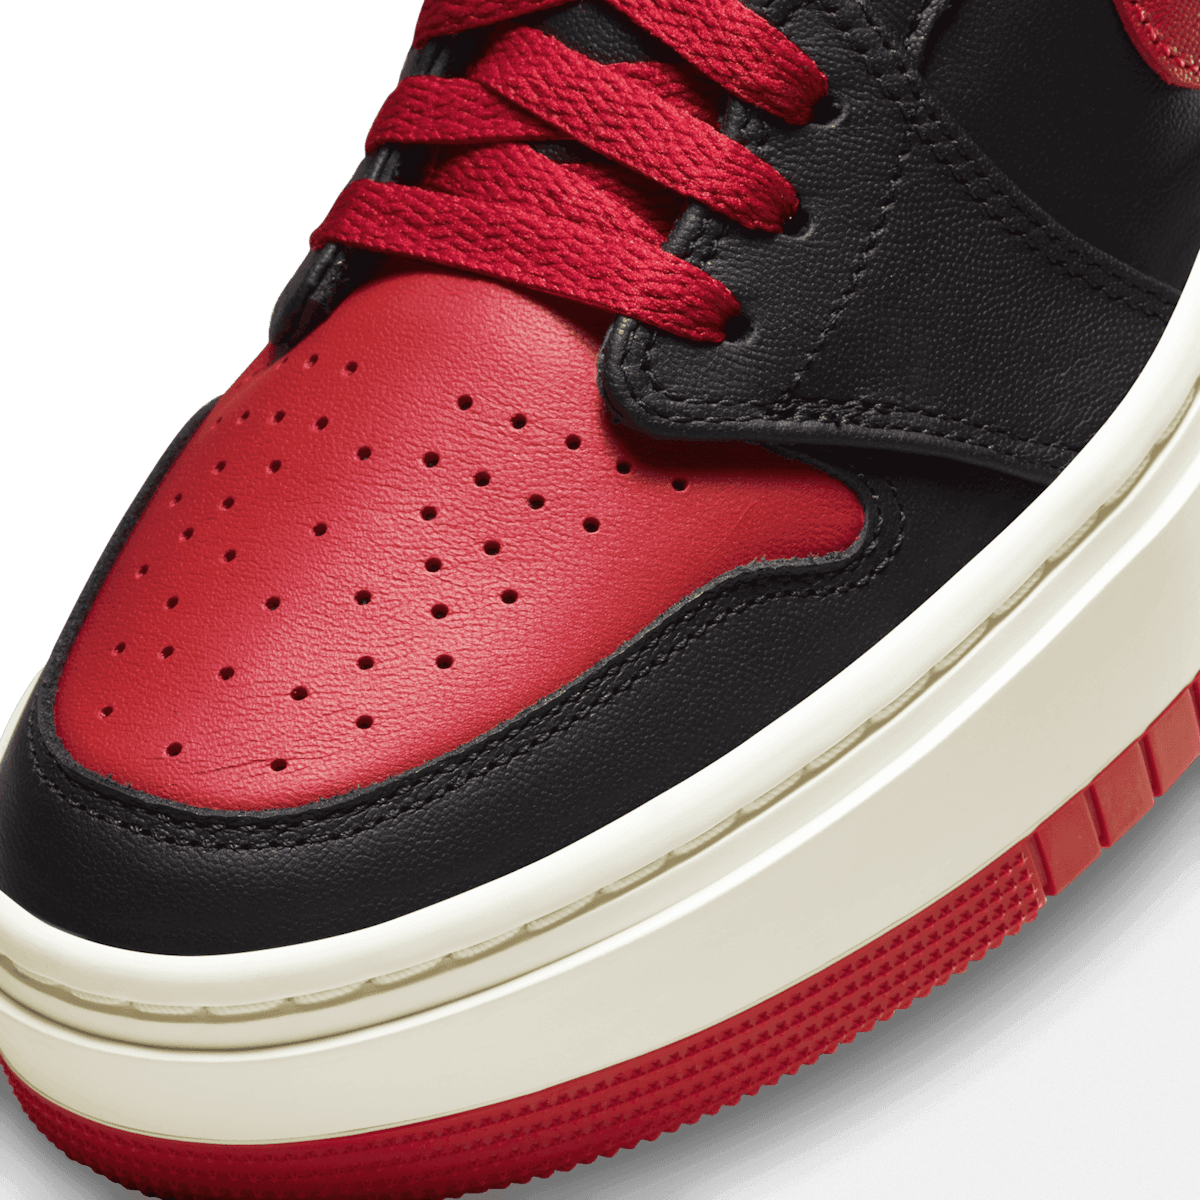 Jordan 1 Low LV8D Elevated Bred (W) Angle 3